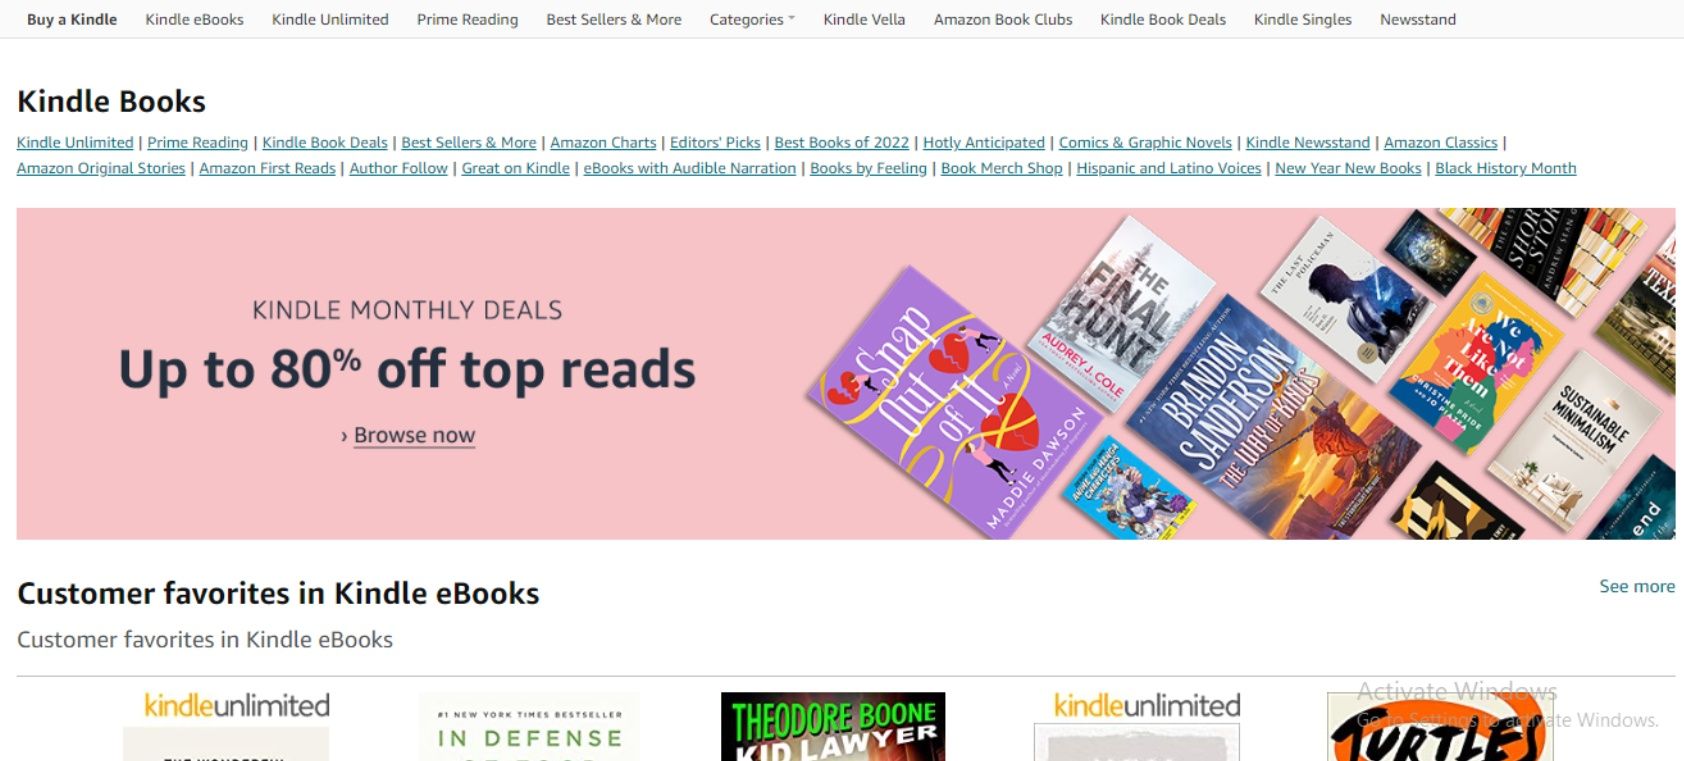 Prime members access free eBooks, audiobooks, magazines, and more